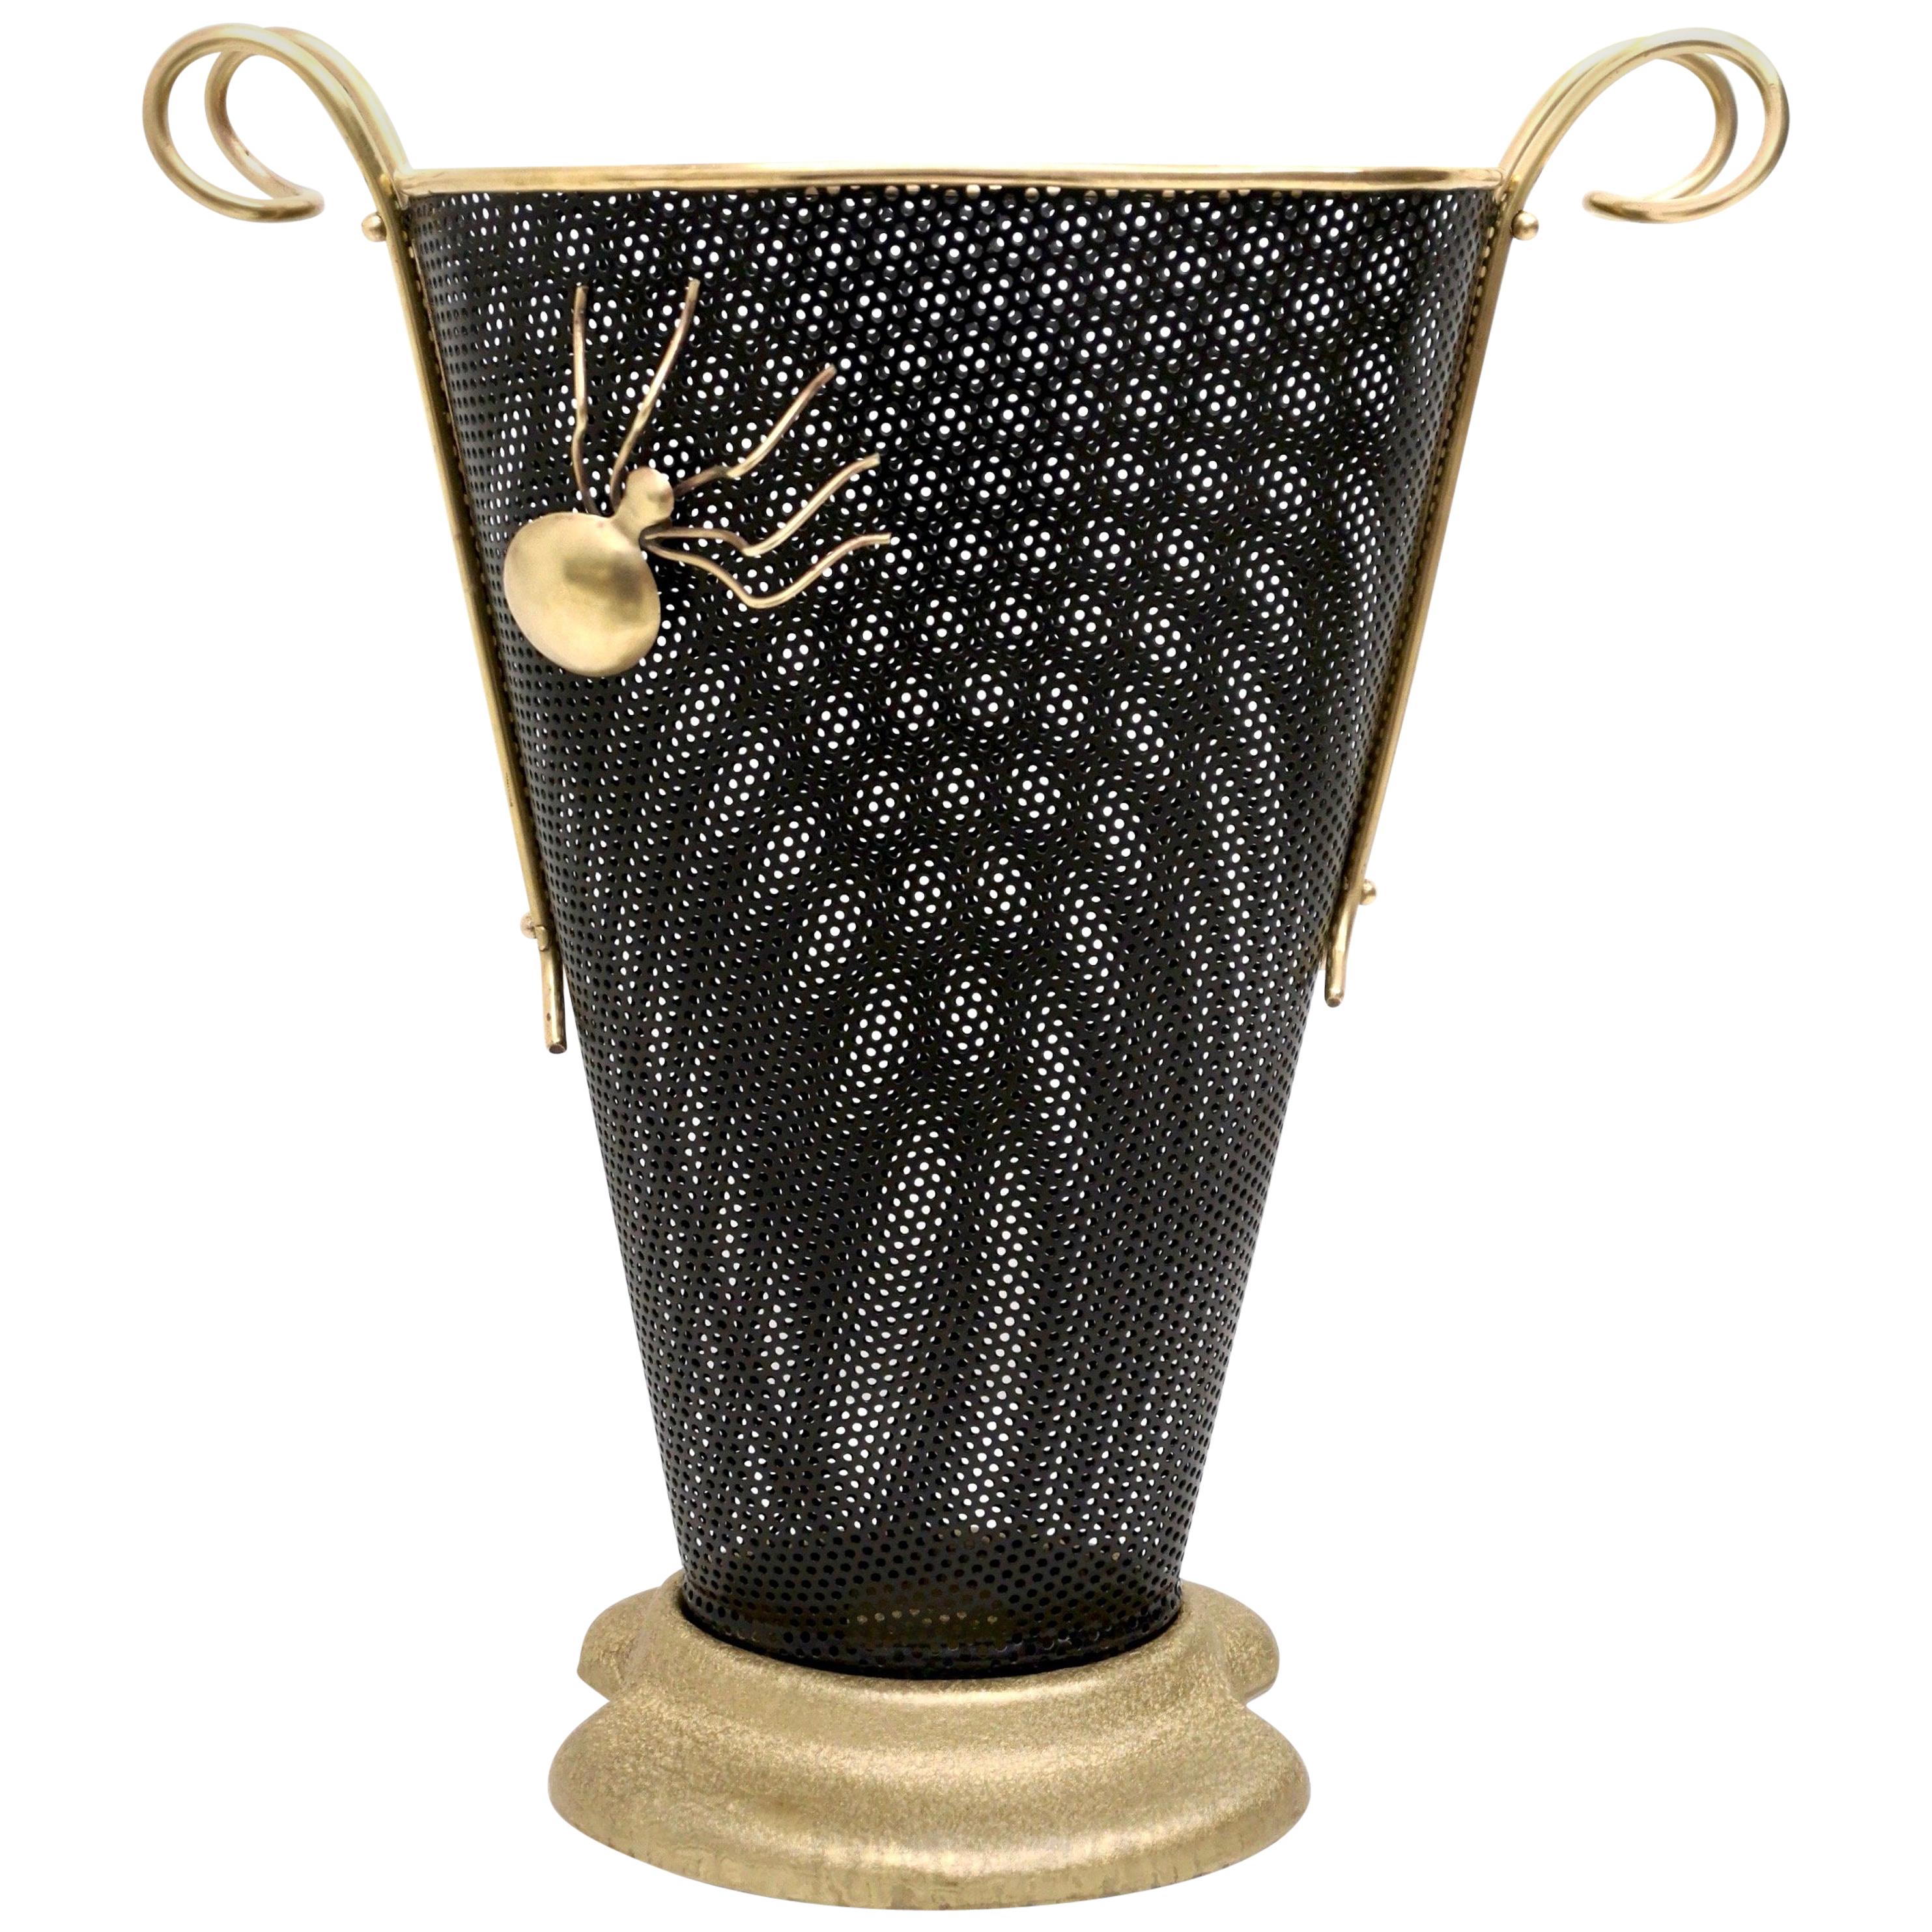 Vintage Black Varnished Metal Umbrella Stand with a Brass Spider, Italy